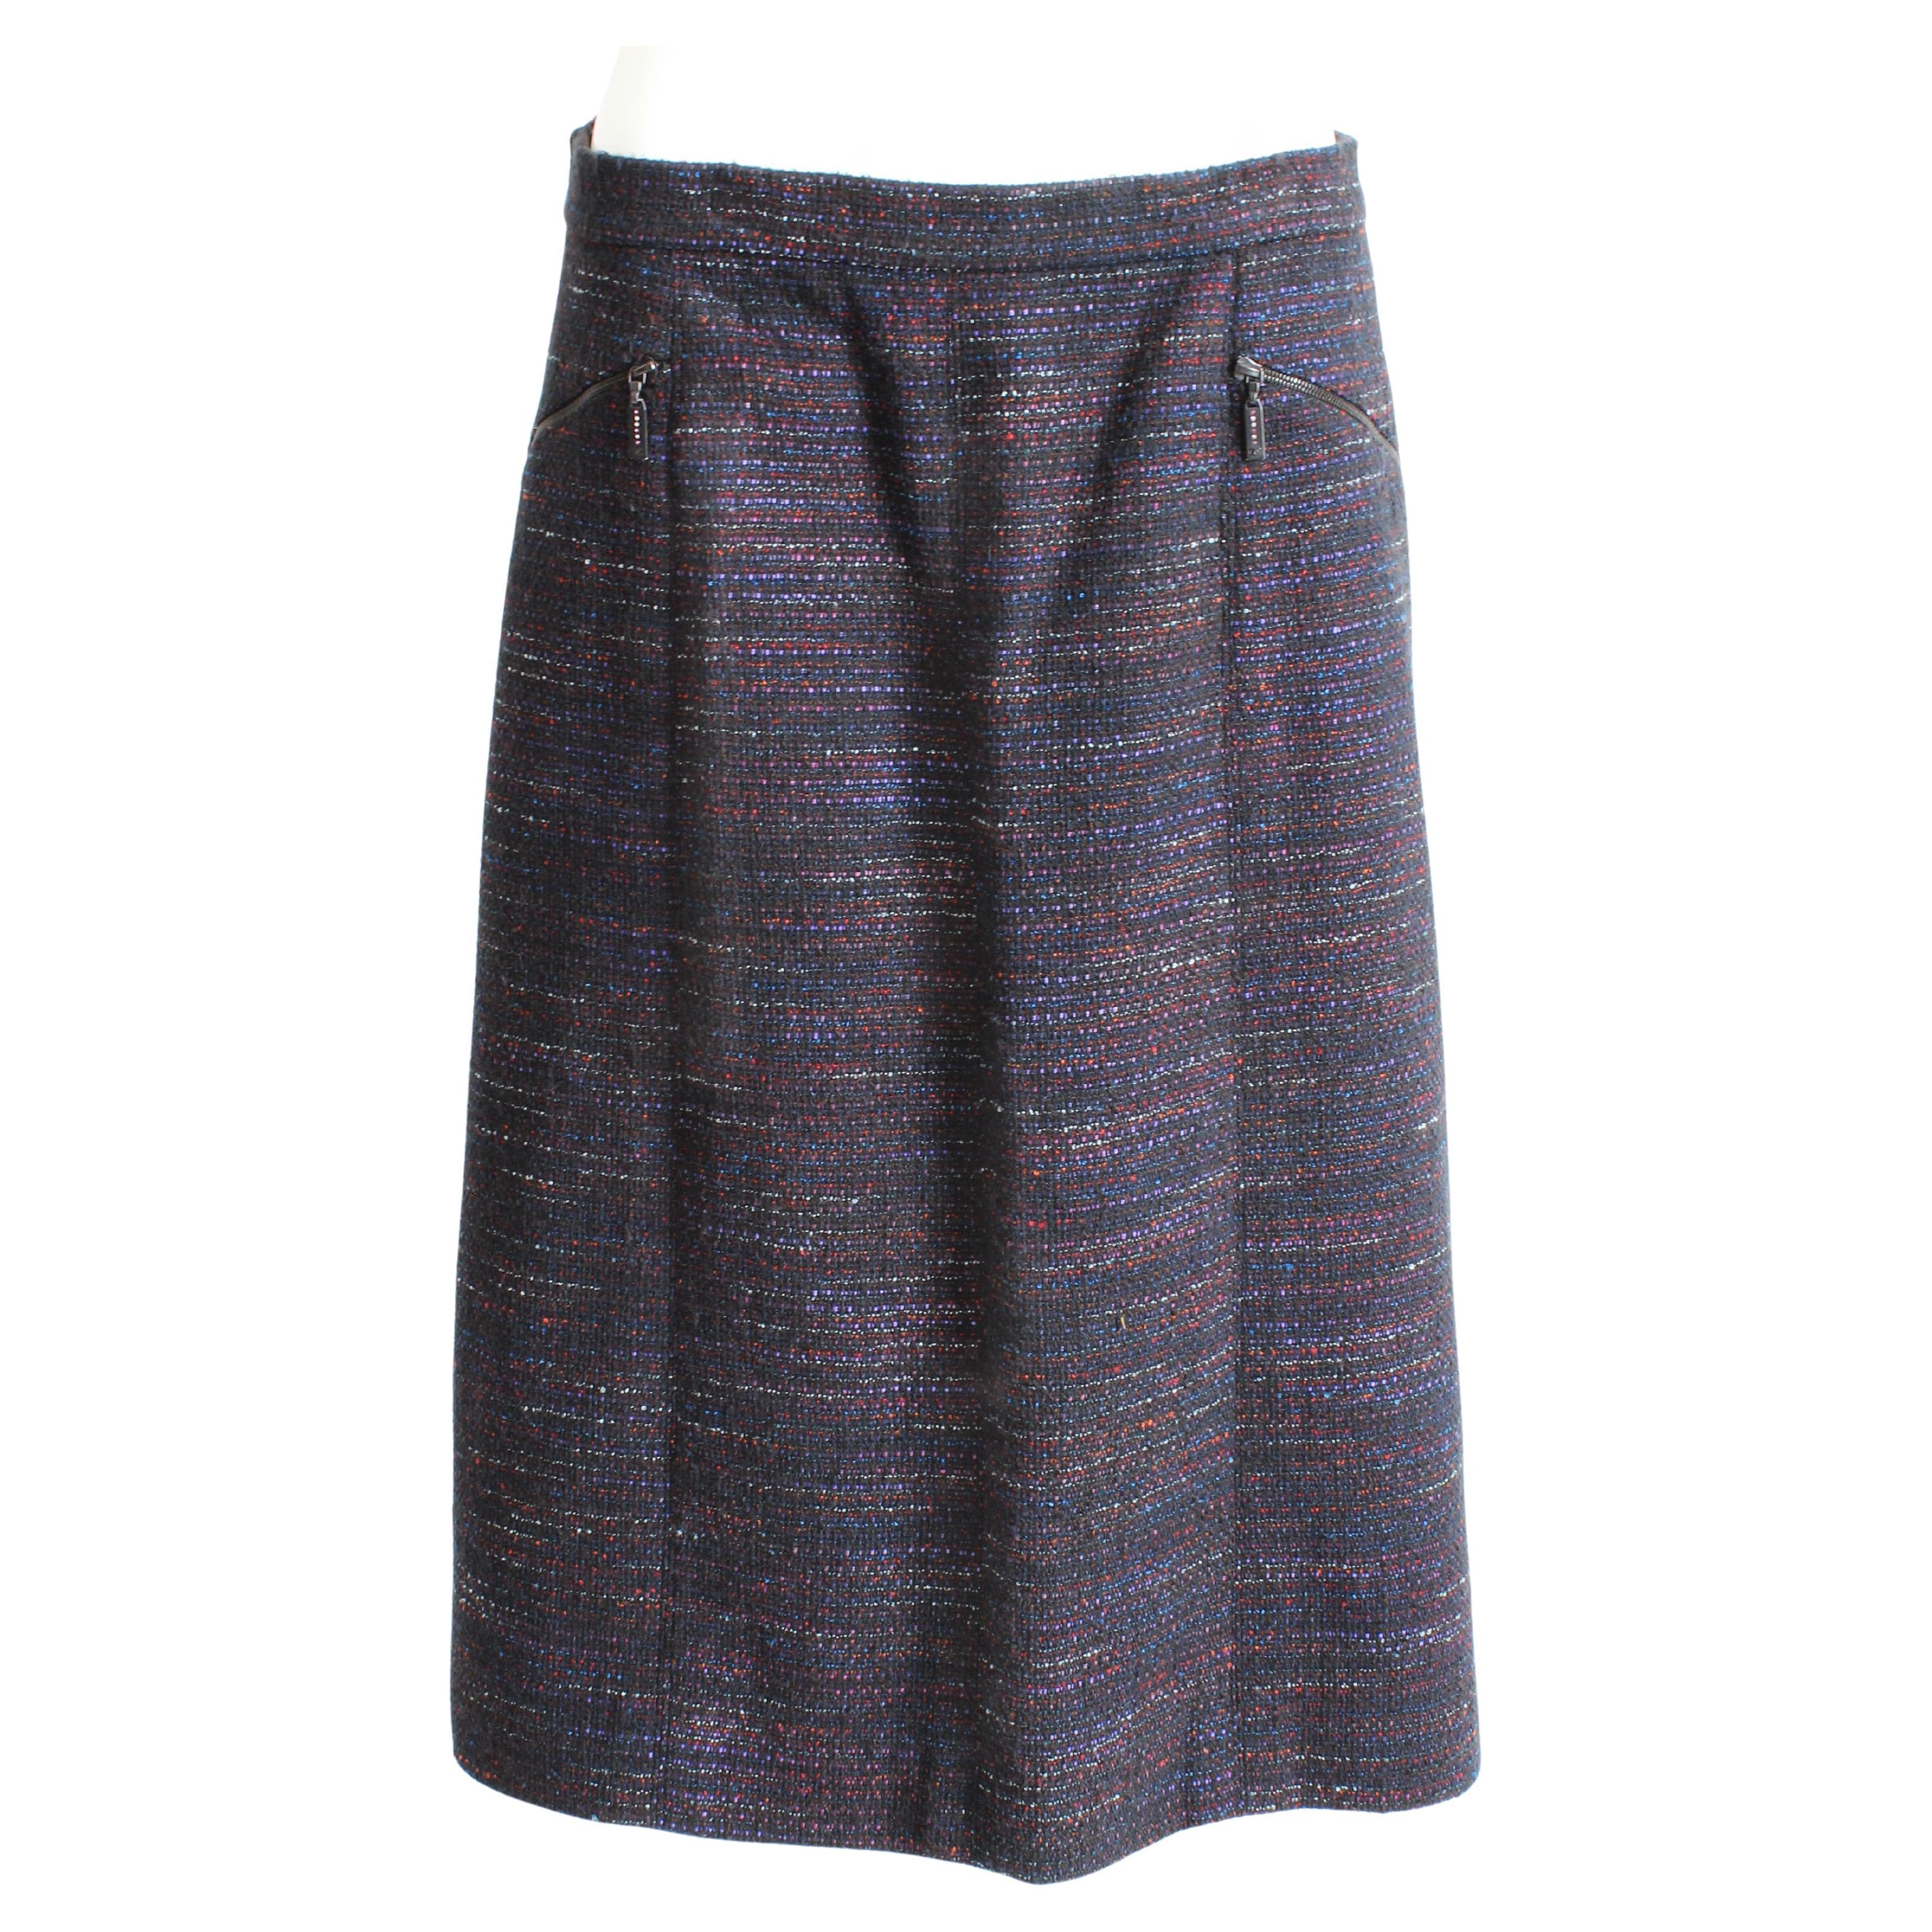 Chanel Skirt Multicolor Cotton Blend Tweed Pencil Style 02A Collection Size 40